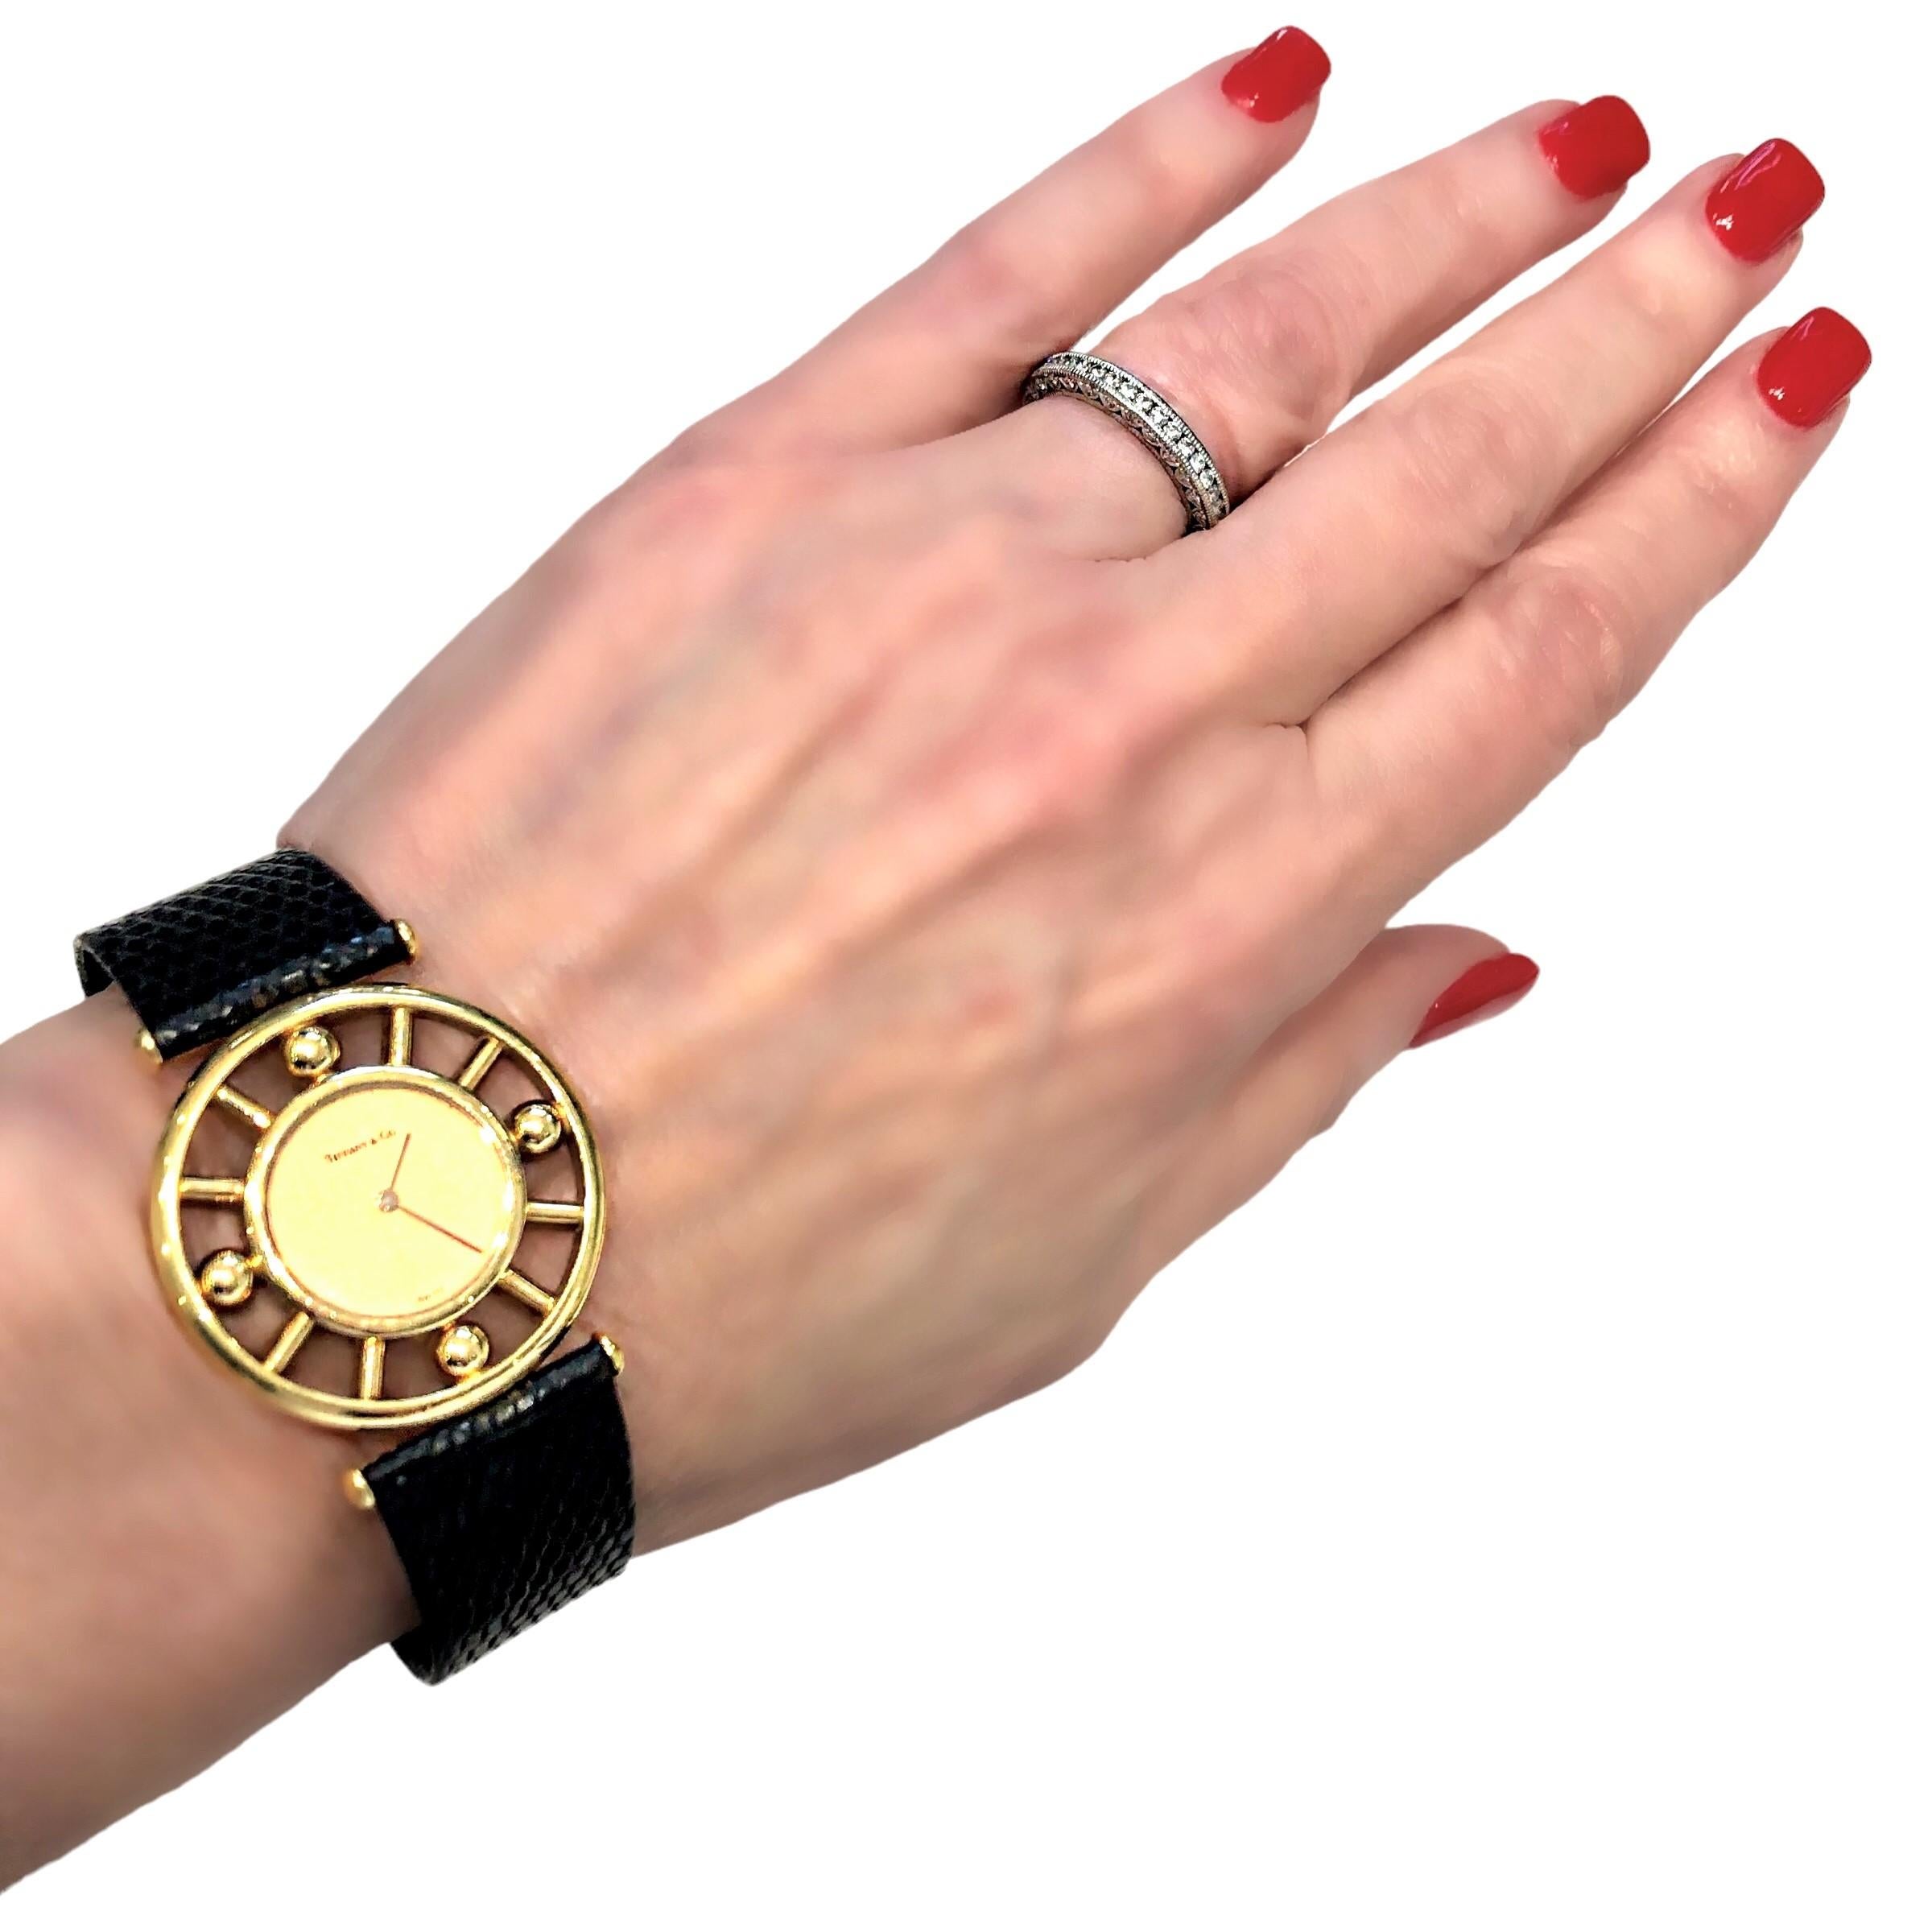 Women's or Men's 18K Yellow Gold Round Watch by Paloma Picasso for Tiffany with Leather Strap